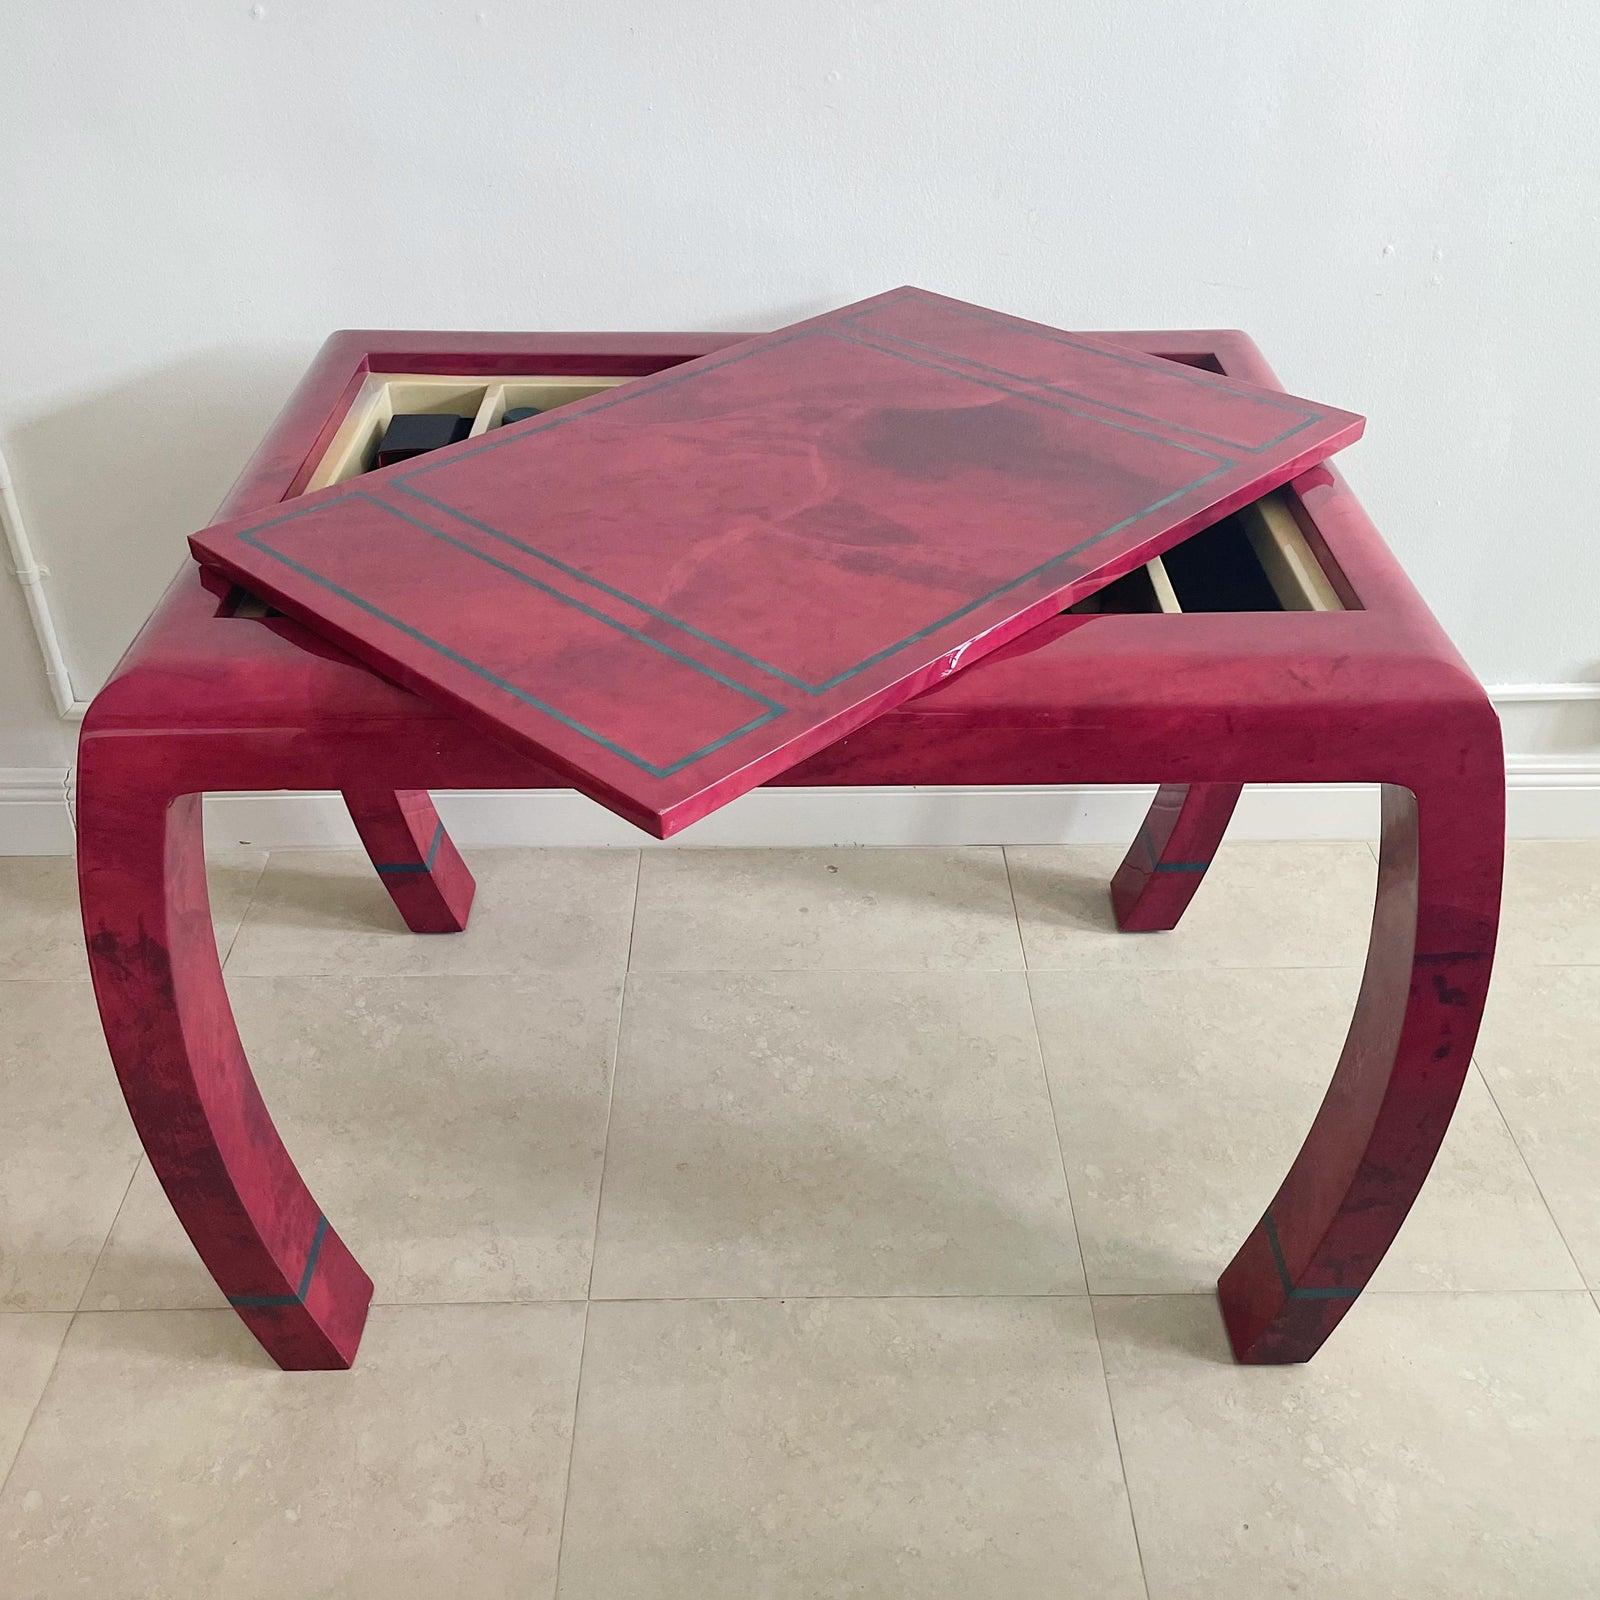 1980's lacquered parchment goatskin with red coloration game table for Enrique Garcel.. With removable reversible top, one side for checkers and the other side plain with a decorative blue parchment inlay. The interior is patterned in red, blue and